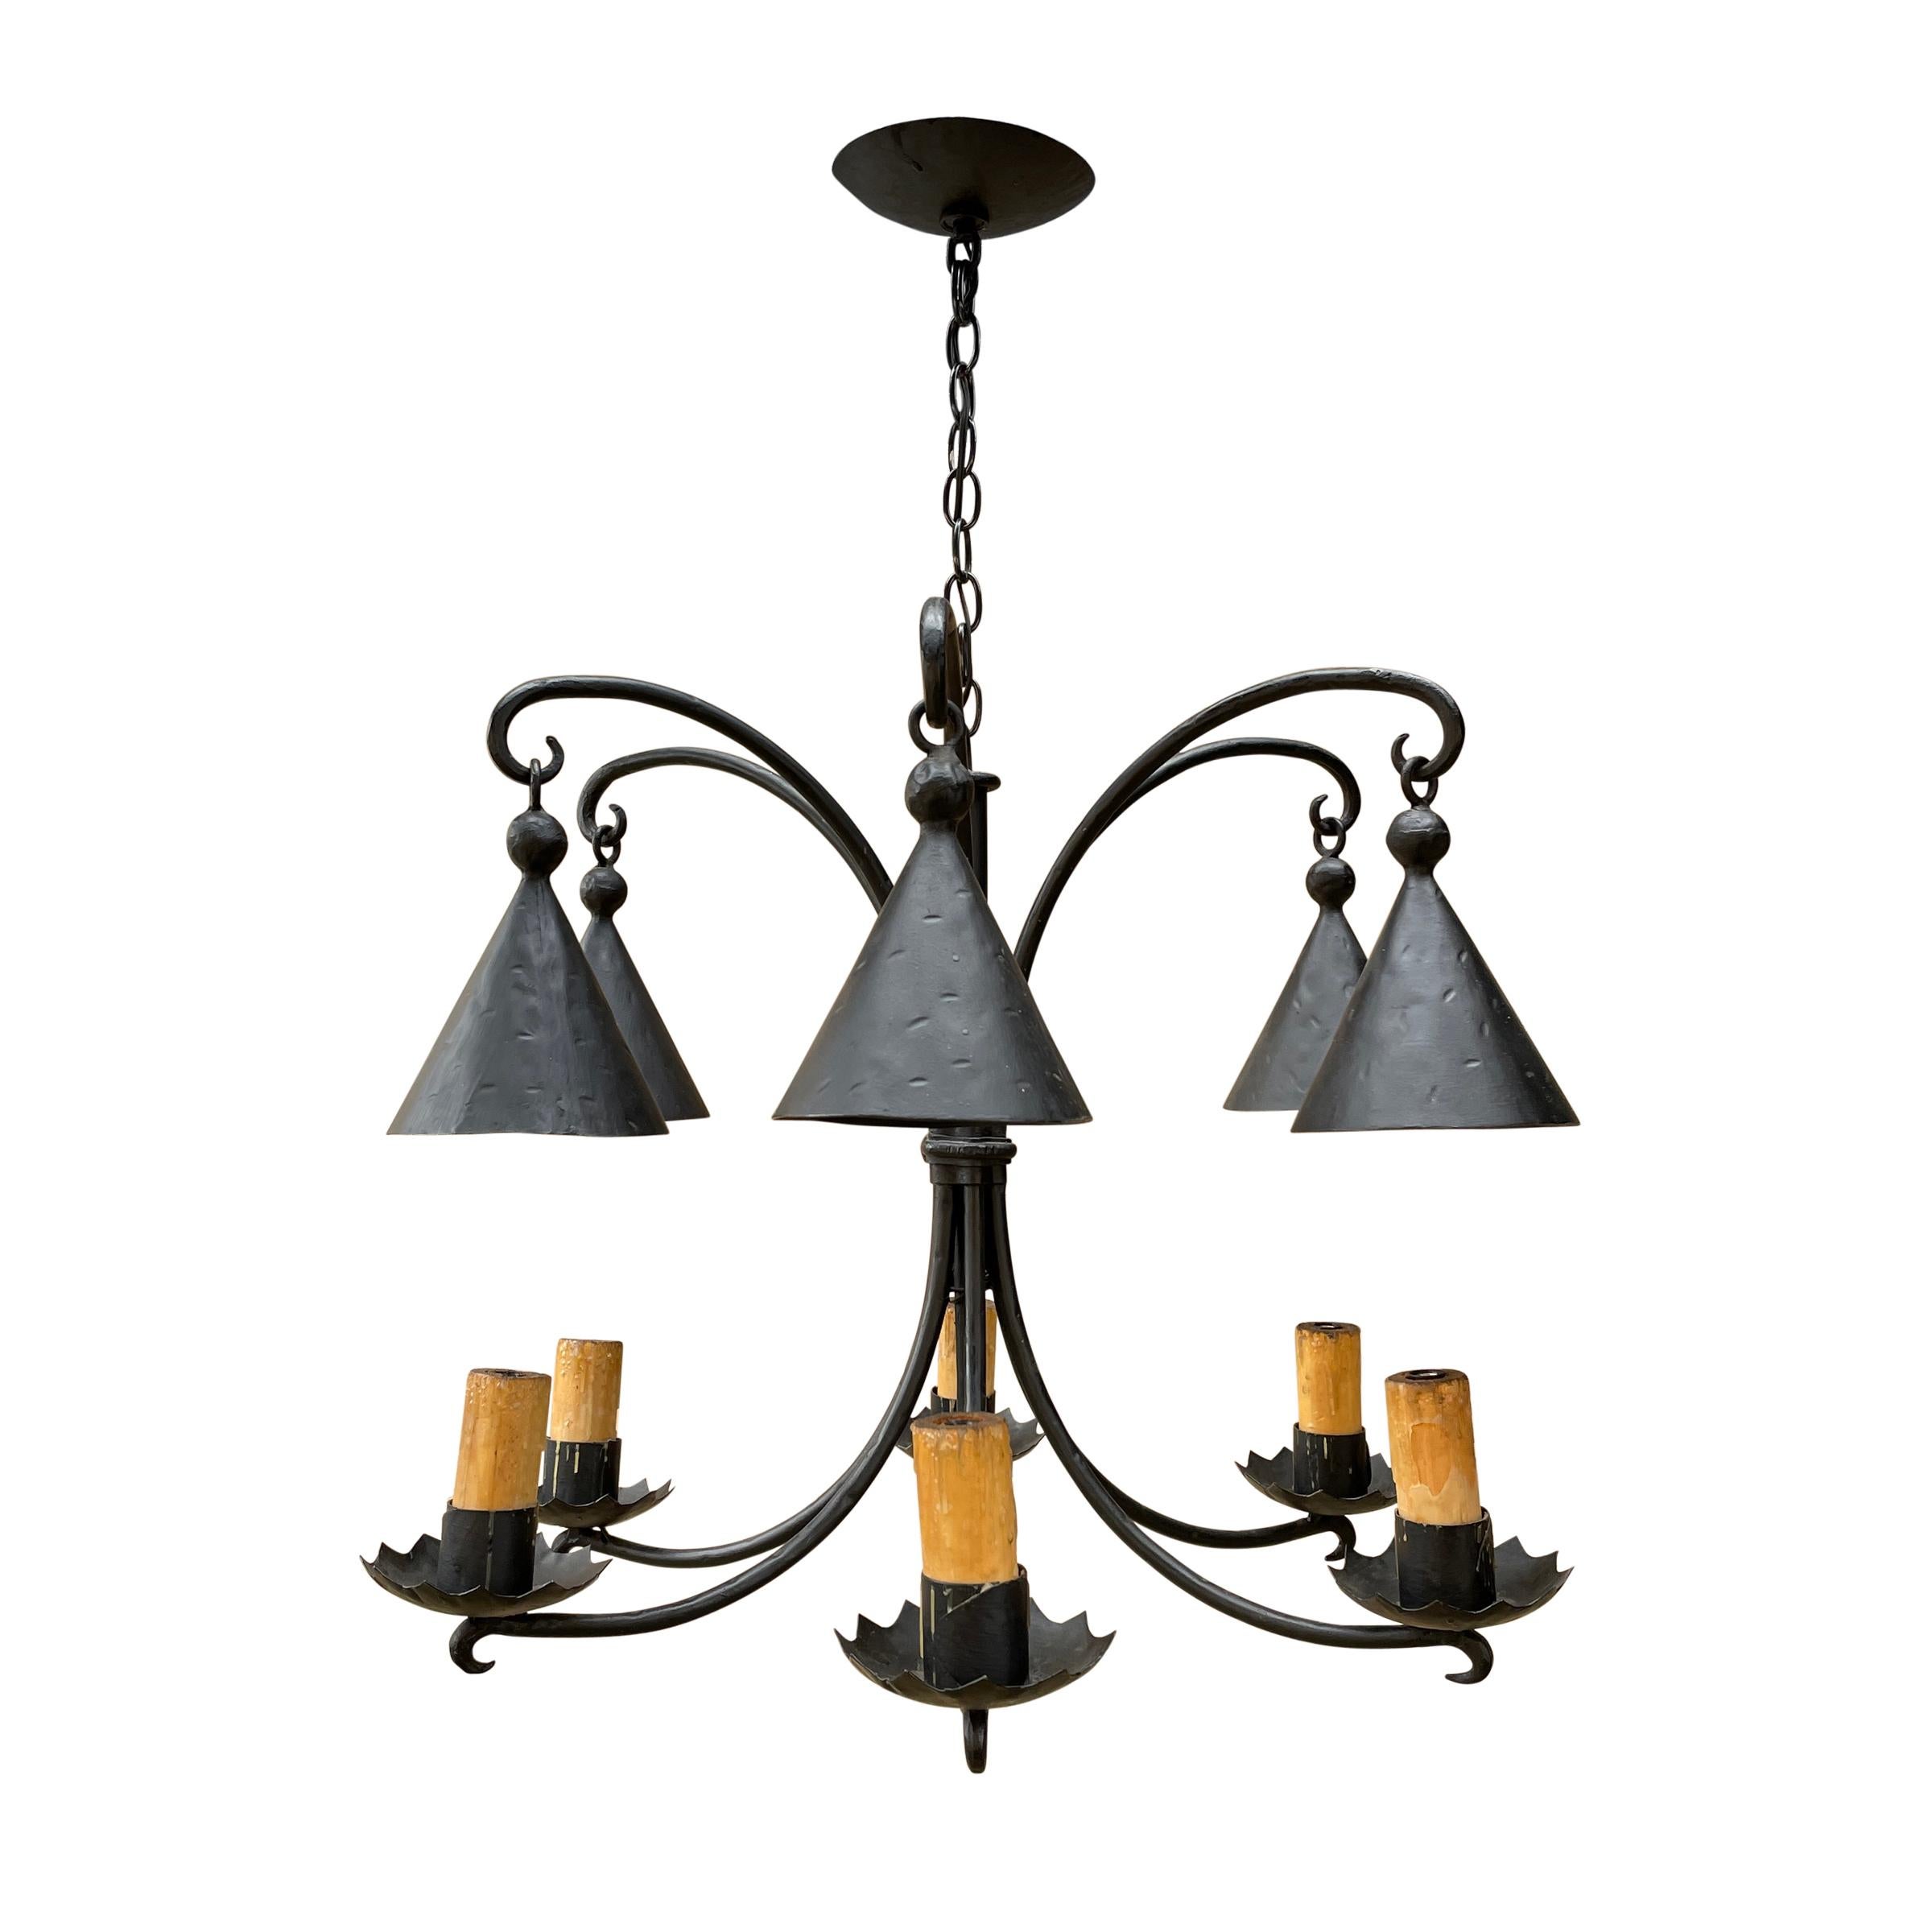 20th Century Vintage American Wrought Iron Six-Arm Chandelier